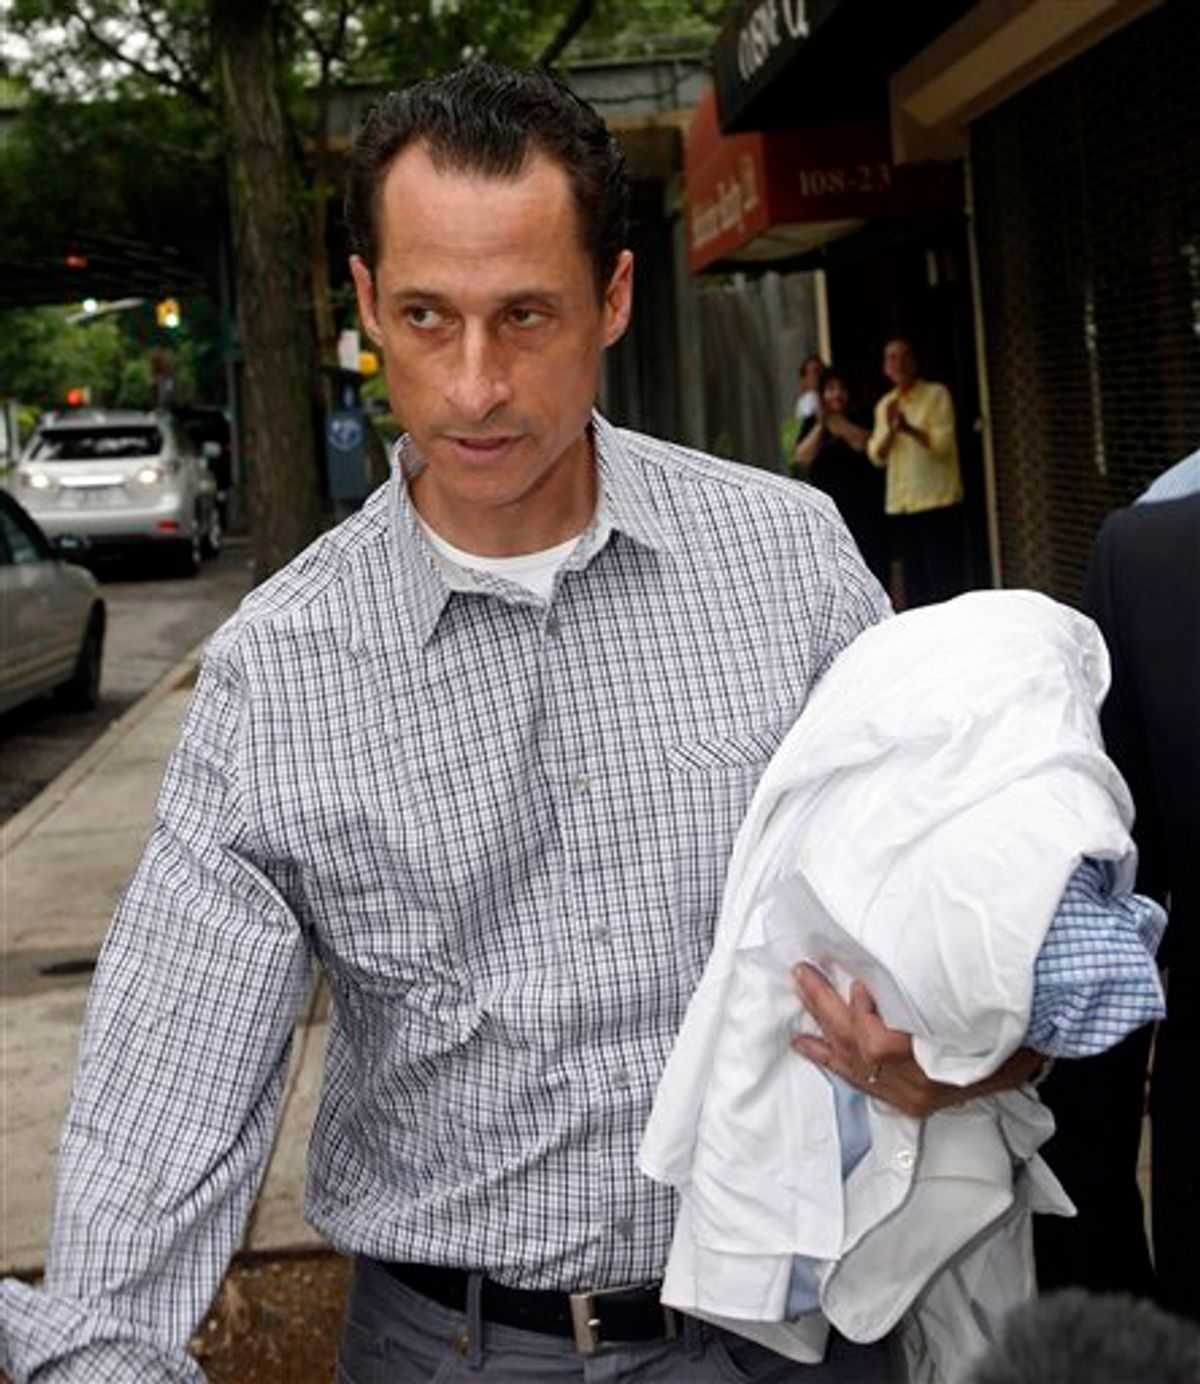 FILE - In this June 11, 2011 file photo, Rep. Anthony Weiner, D-N.Y., carries his laundry to a laundromat near his home in the Queens borough of New York, Saturday, June  11, 2011. Weiner admitted last week that he had Tweeted sexually charged messages and photos to at least six women and lied about it.  (AP Photo/David Karp, File)  (AP)